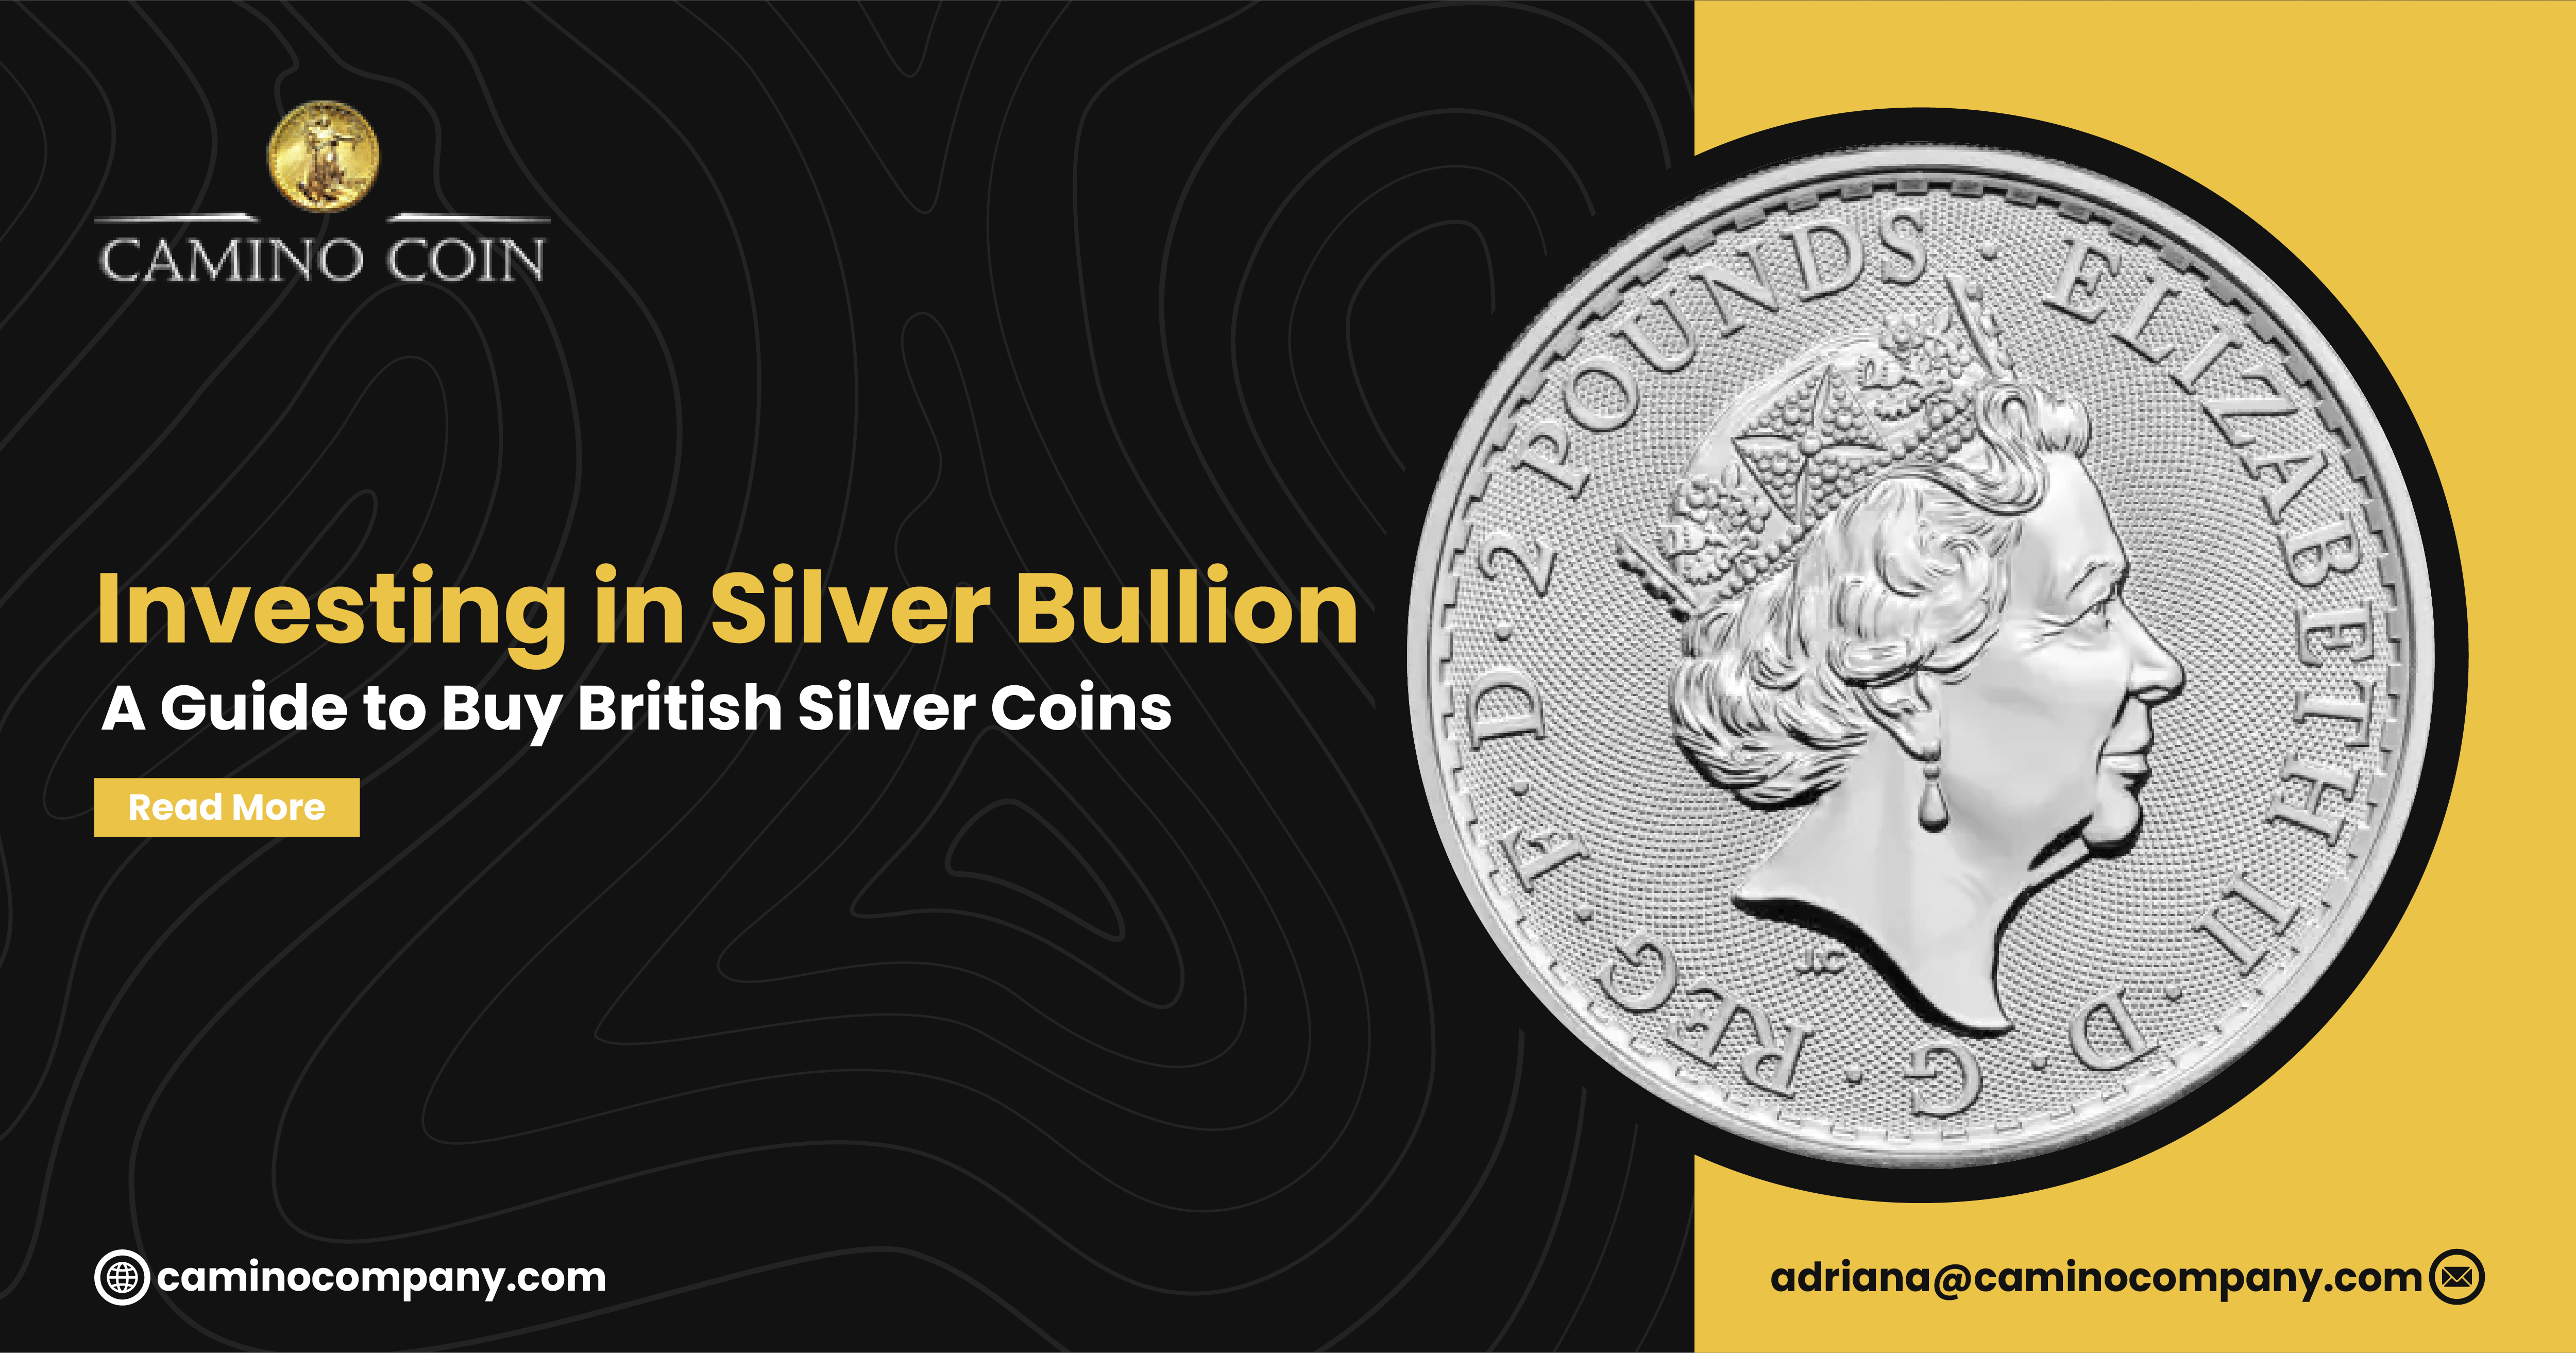 Investing in Silver Bullion: A Guide to Buy British Silver Coins